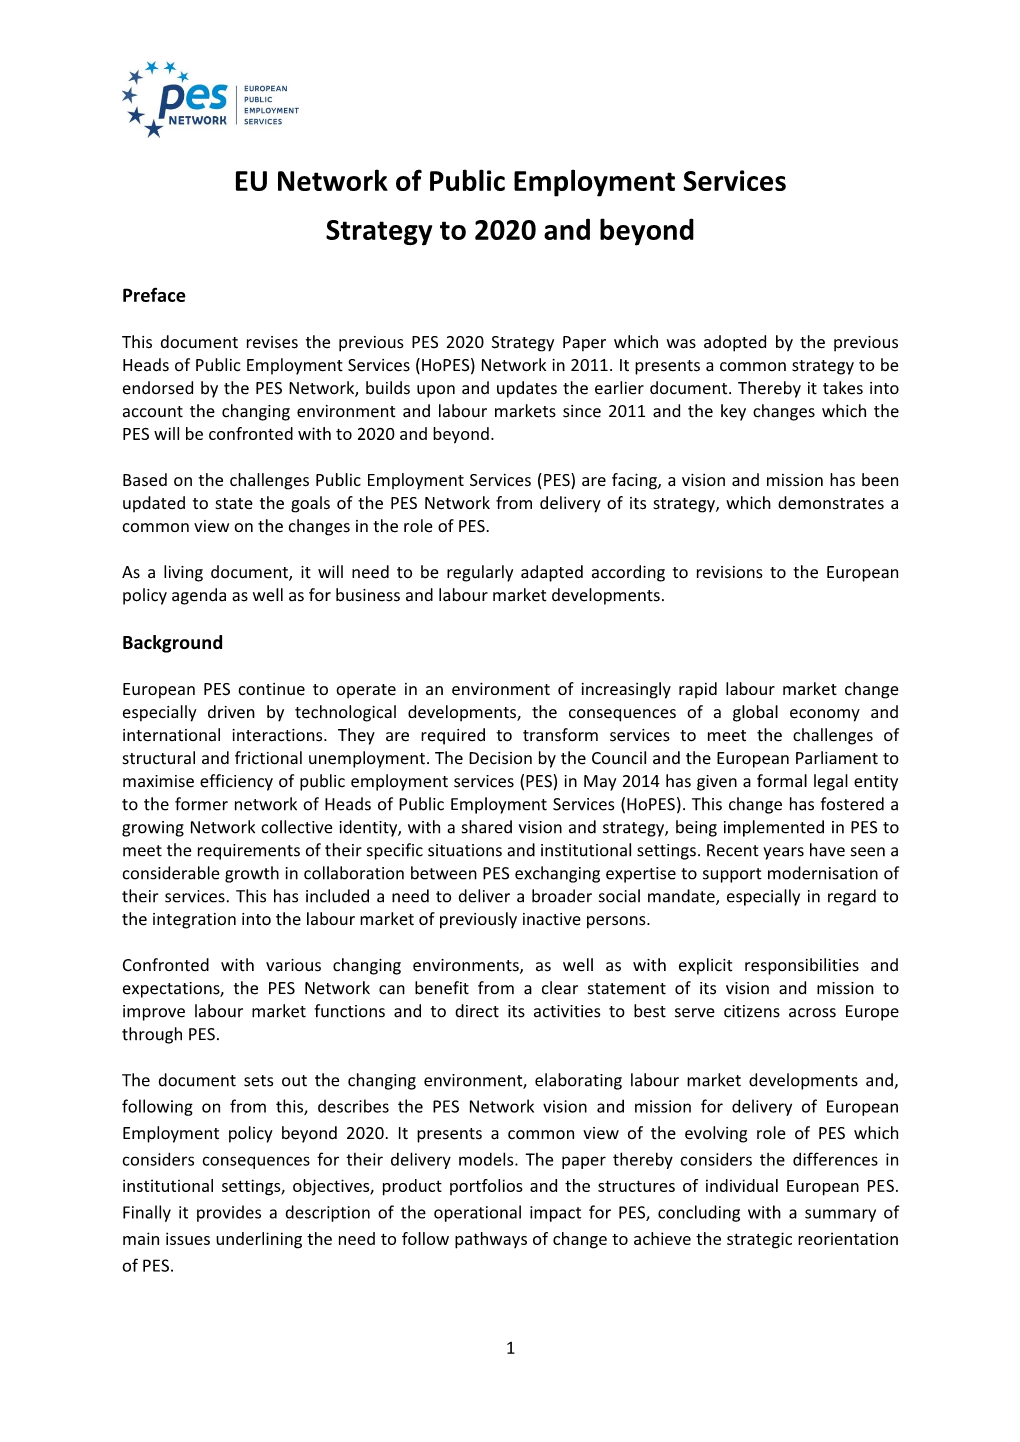 EU Network of Public Employment Services Strategy to 2020 and Beyond